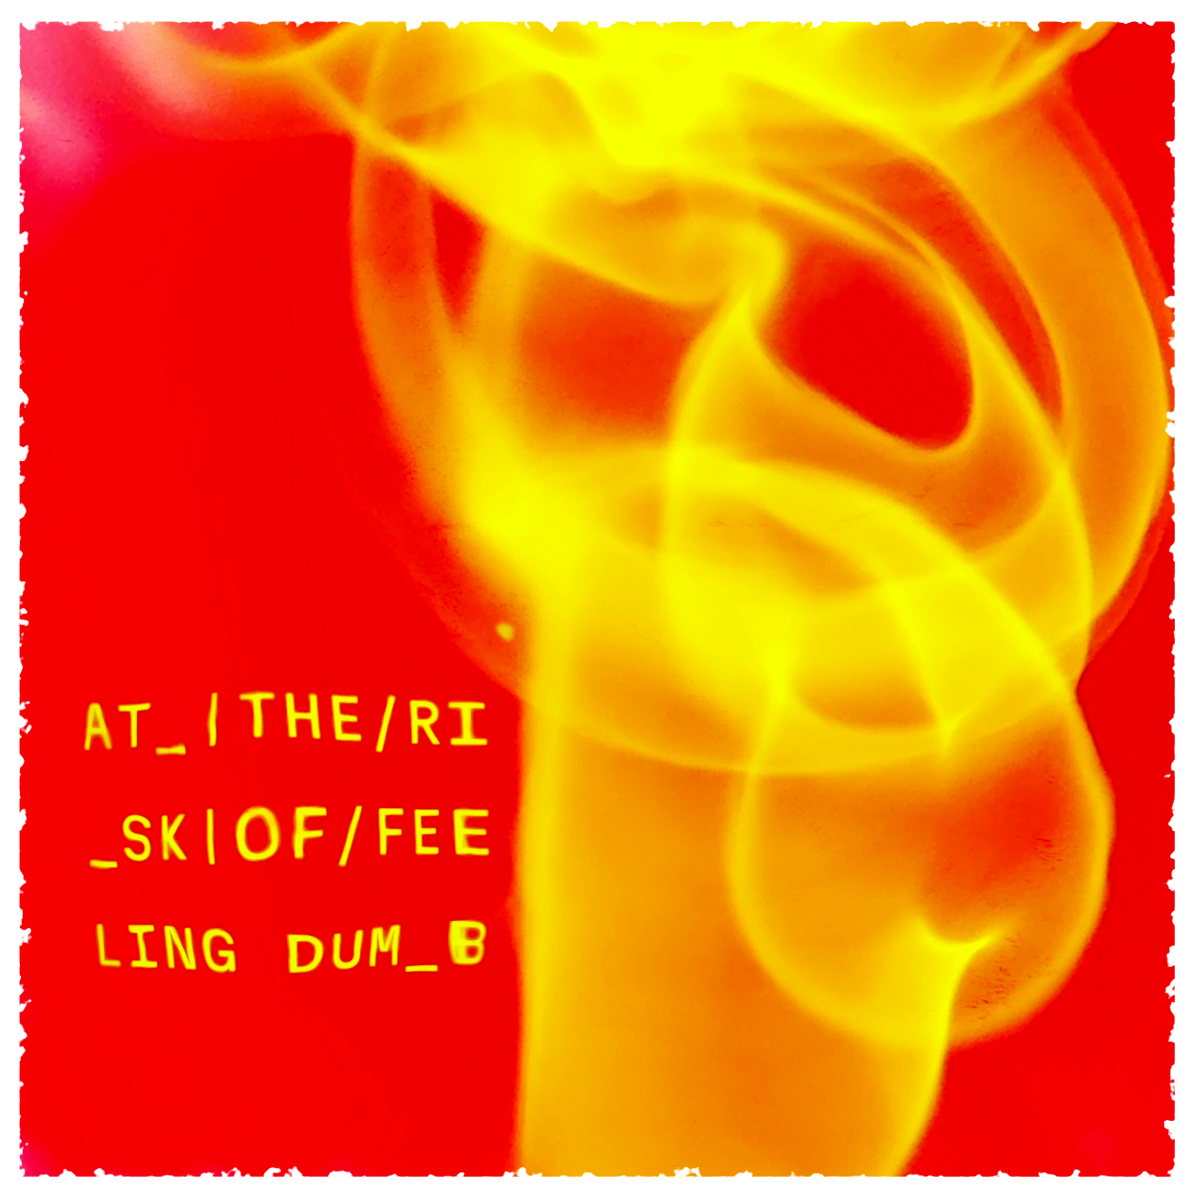 Album cover. yellow smoke on a red
background